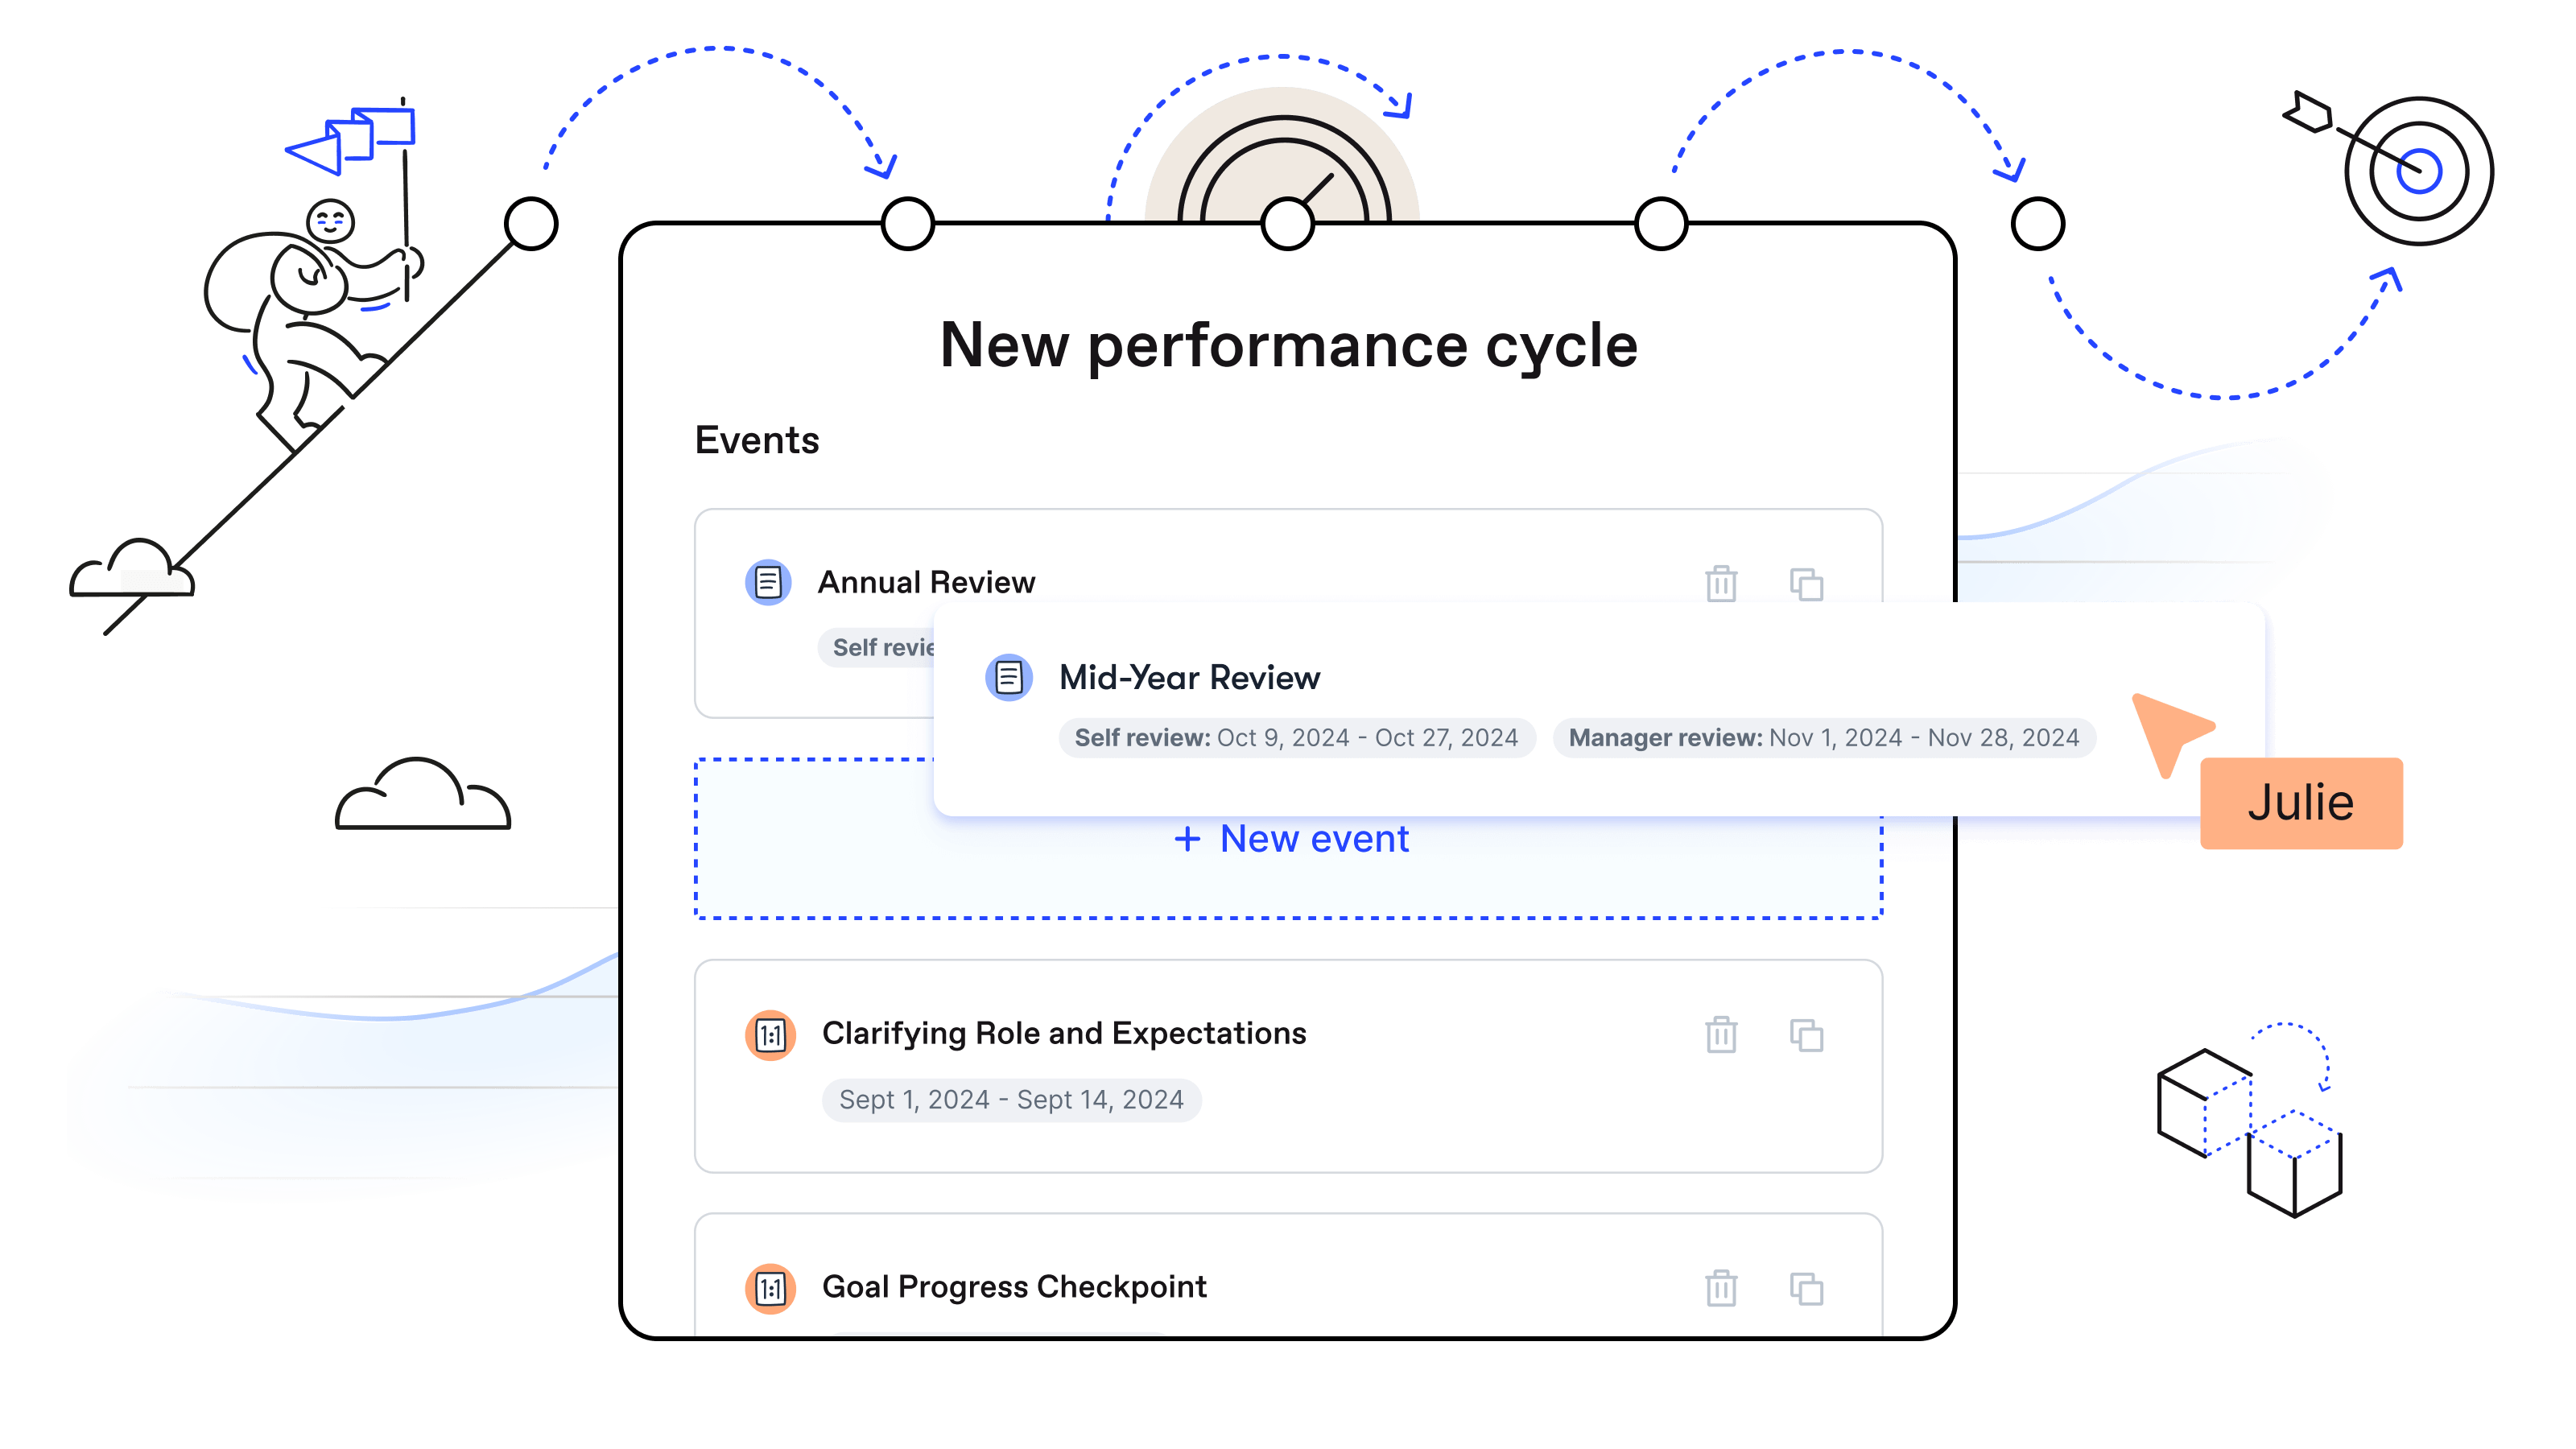 Officevibe new performance cycle management page to view and schedule events such as a self and manager Mid-Year Review.